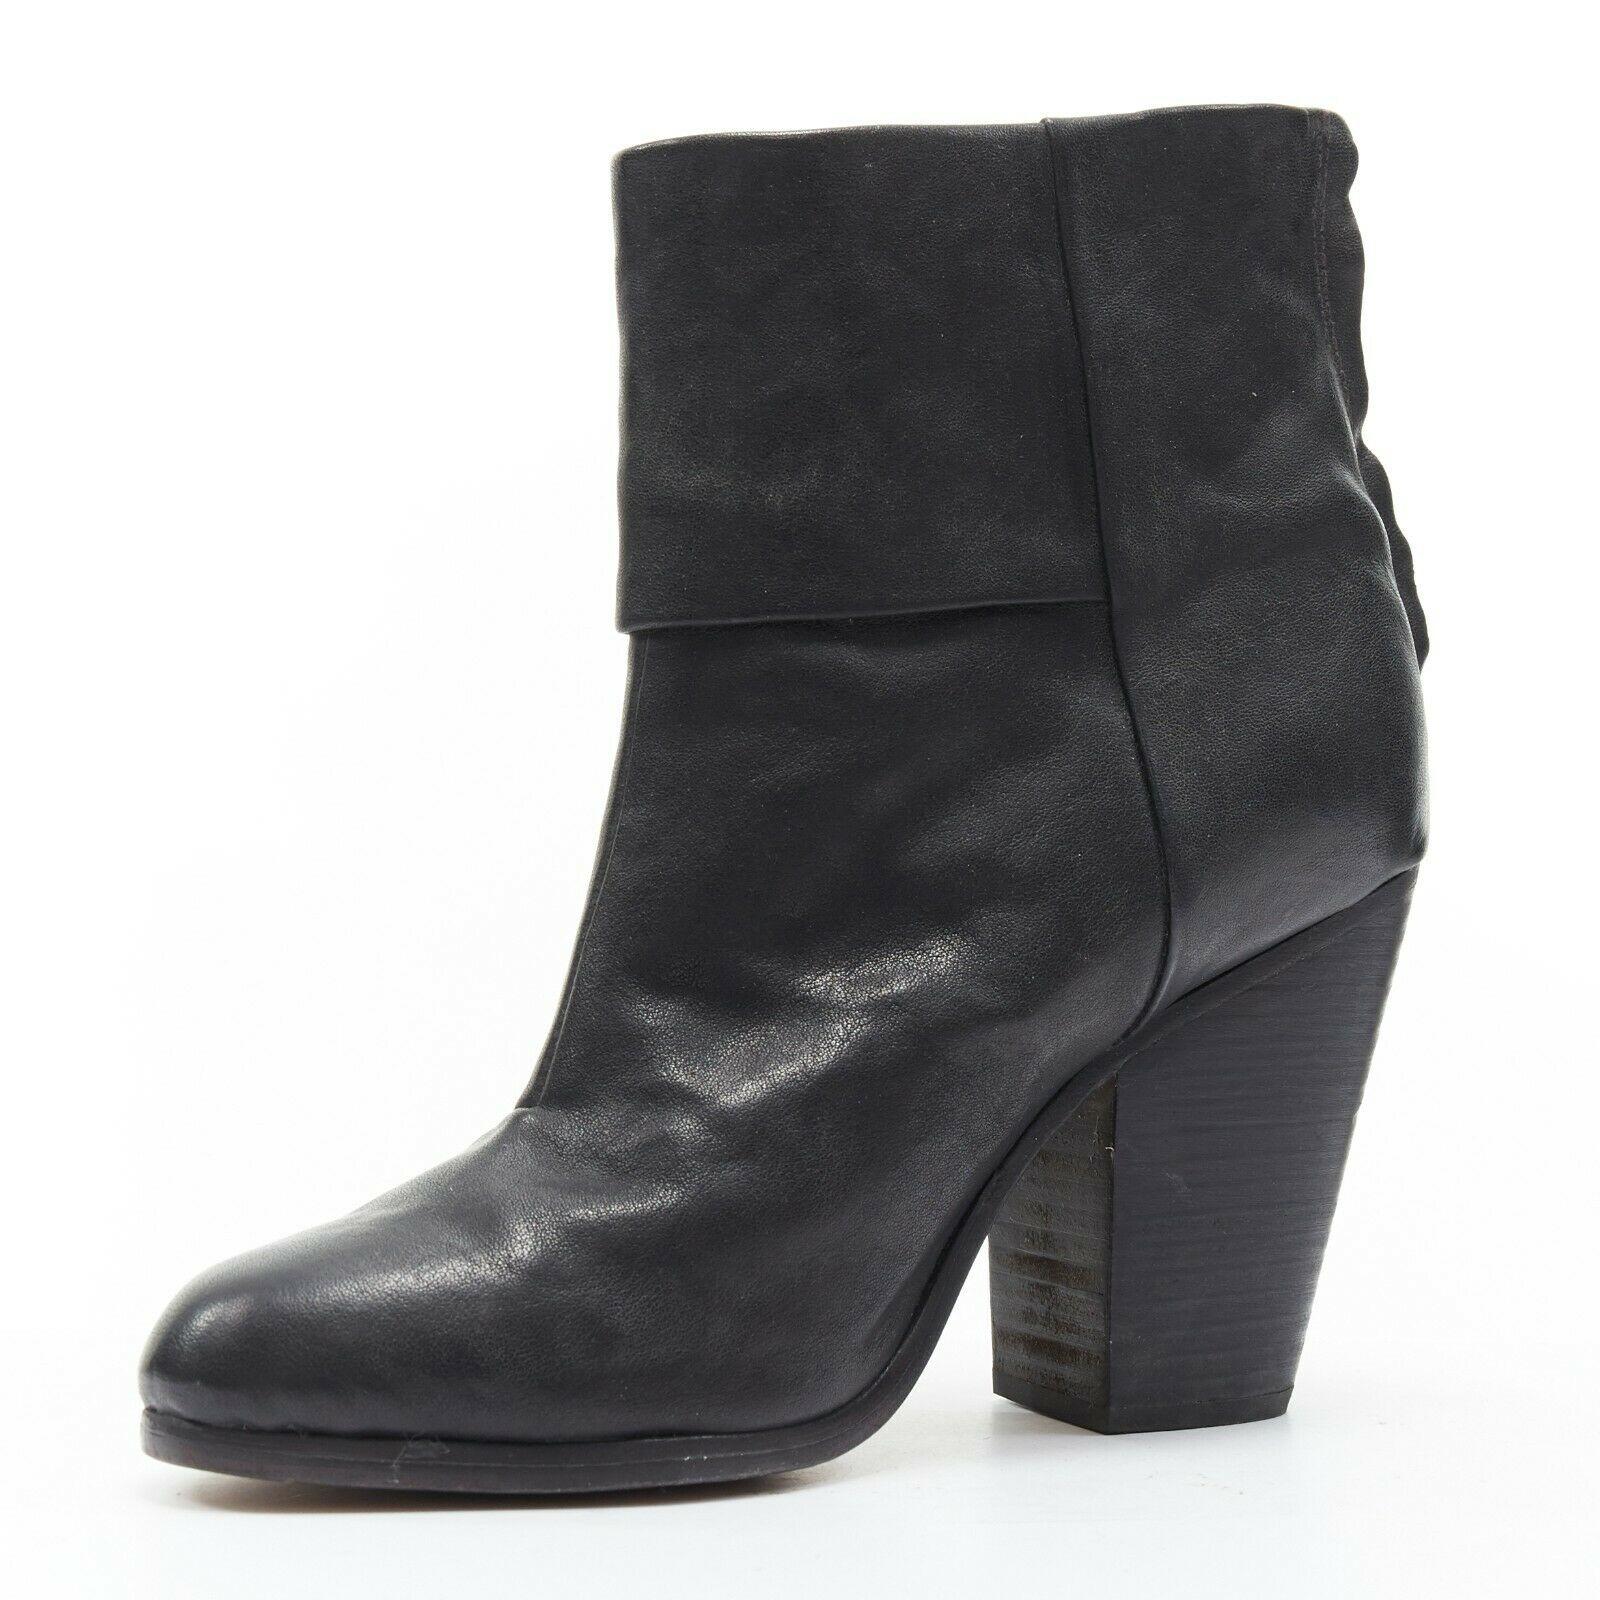 Black RAG BONE black leather round toe chunky stacked heel western ankle boot EU36 For Sale